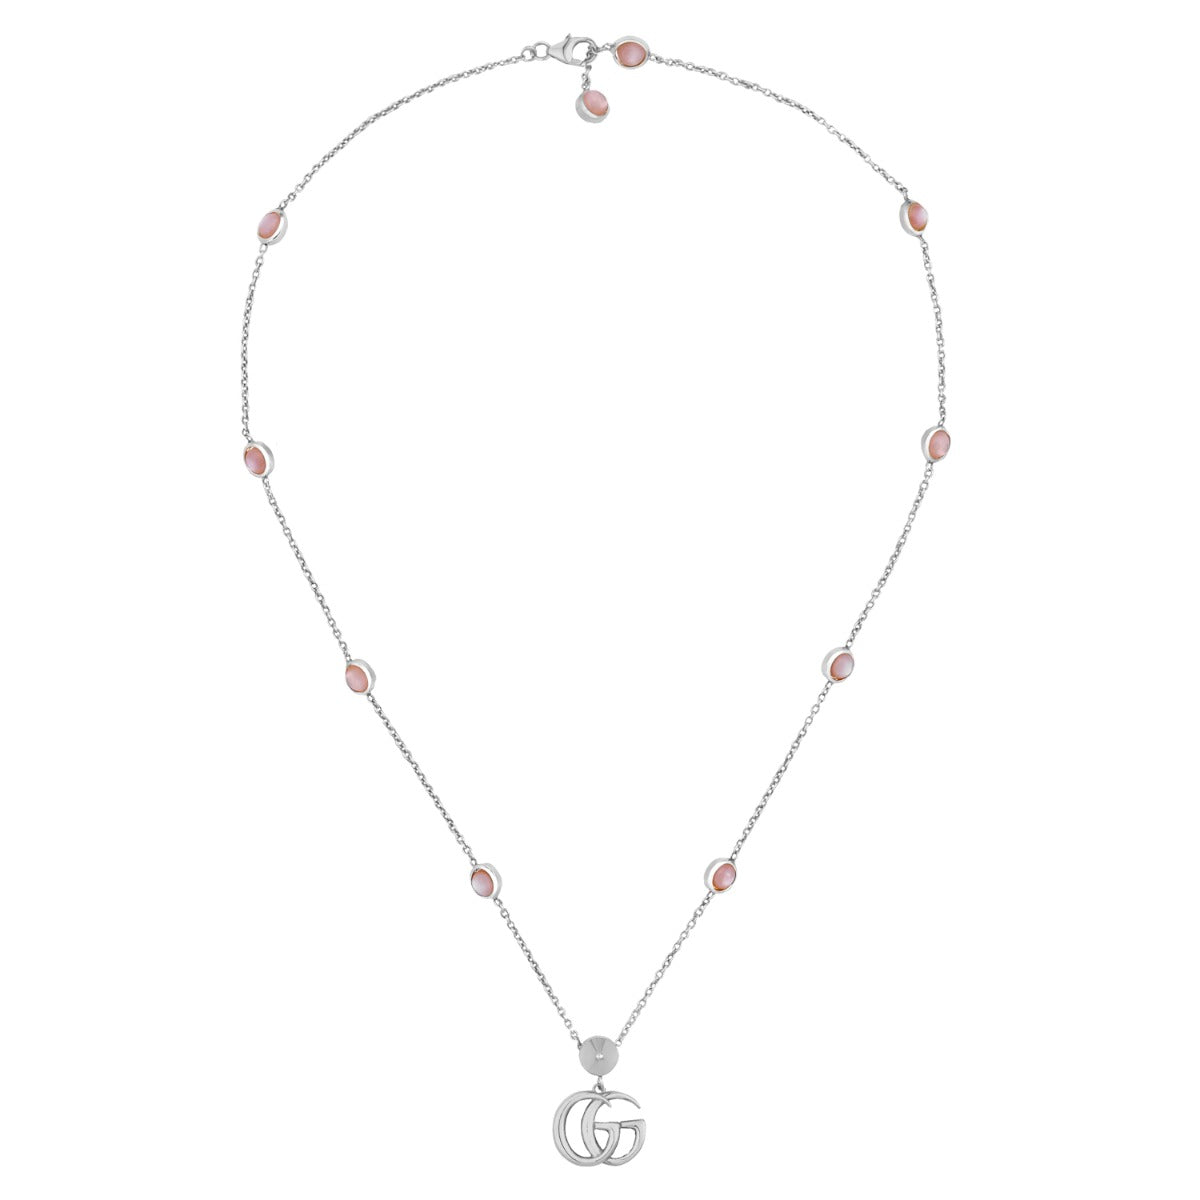 Gucci GG Marmont Sterling Silver Necklace YBB52739900200U